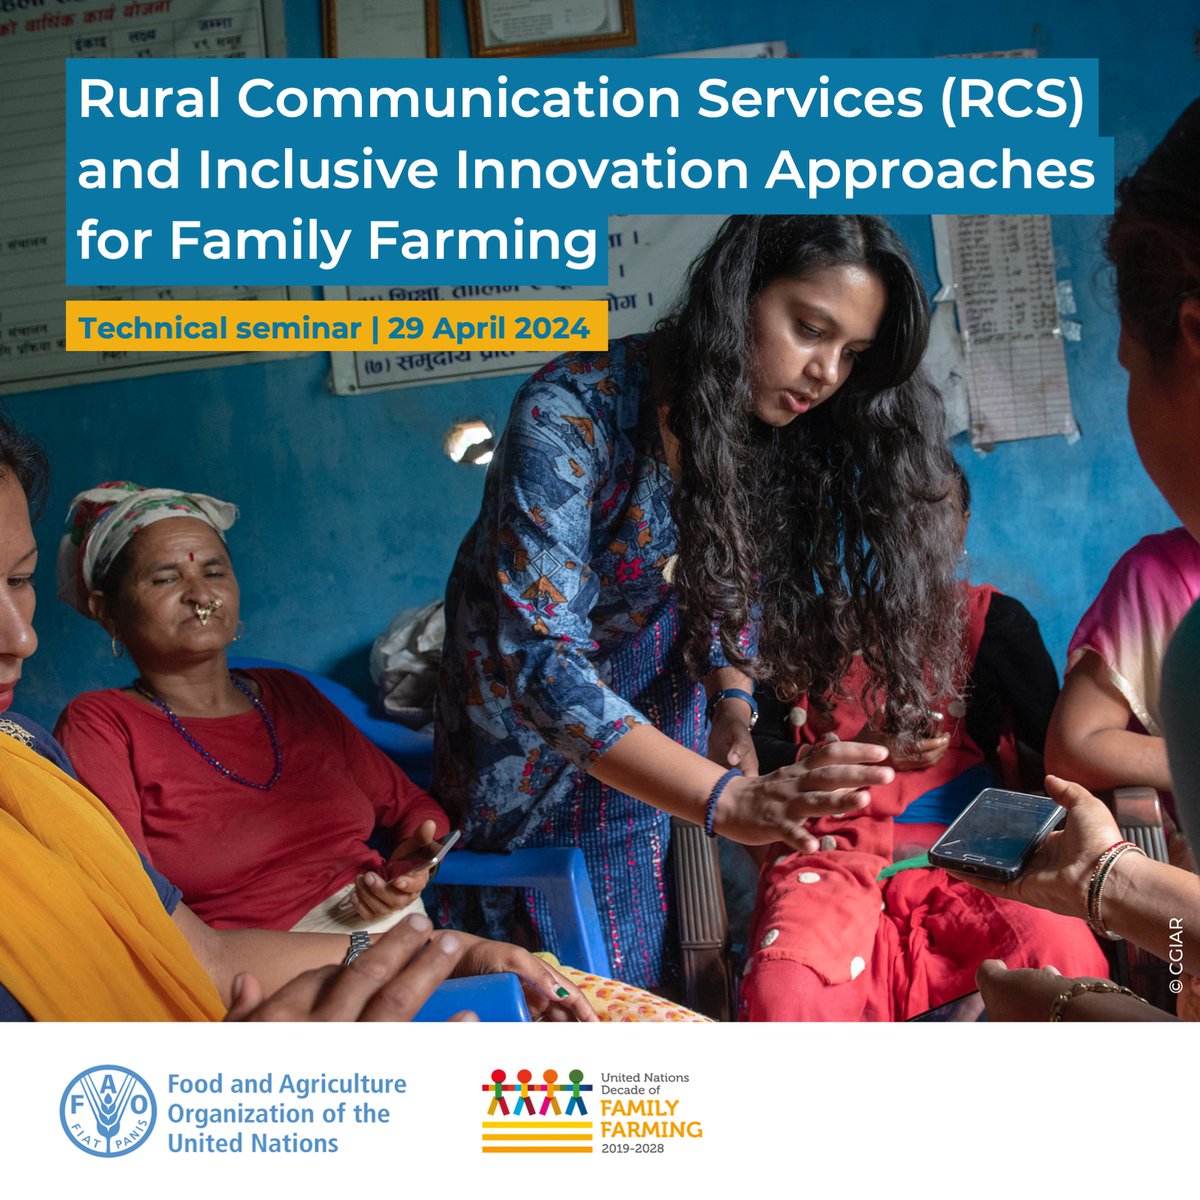 Join @FAO’s technical seminar on Rural Communication Services & Inclusive Innovation for #FamilyFarming, & let's empower family farmers together! 🌱 🗓️29/04, Rome Register: bit.ly/3Q9tECL Watch live: 🕘 09:00: bit.ly/4aGcKUD 🕑 14:00: bit.ly/3UkmnCP